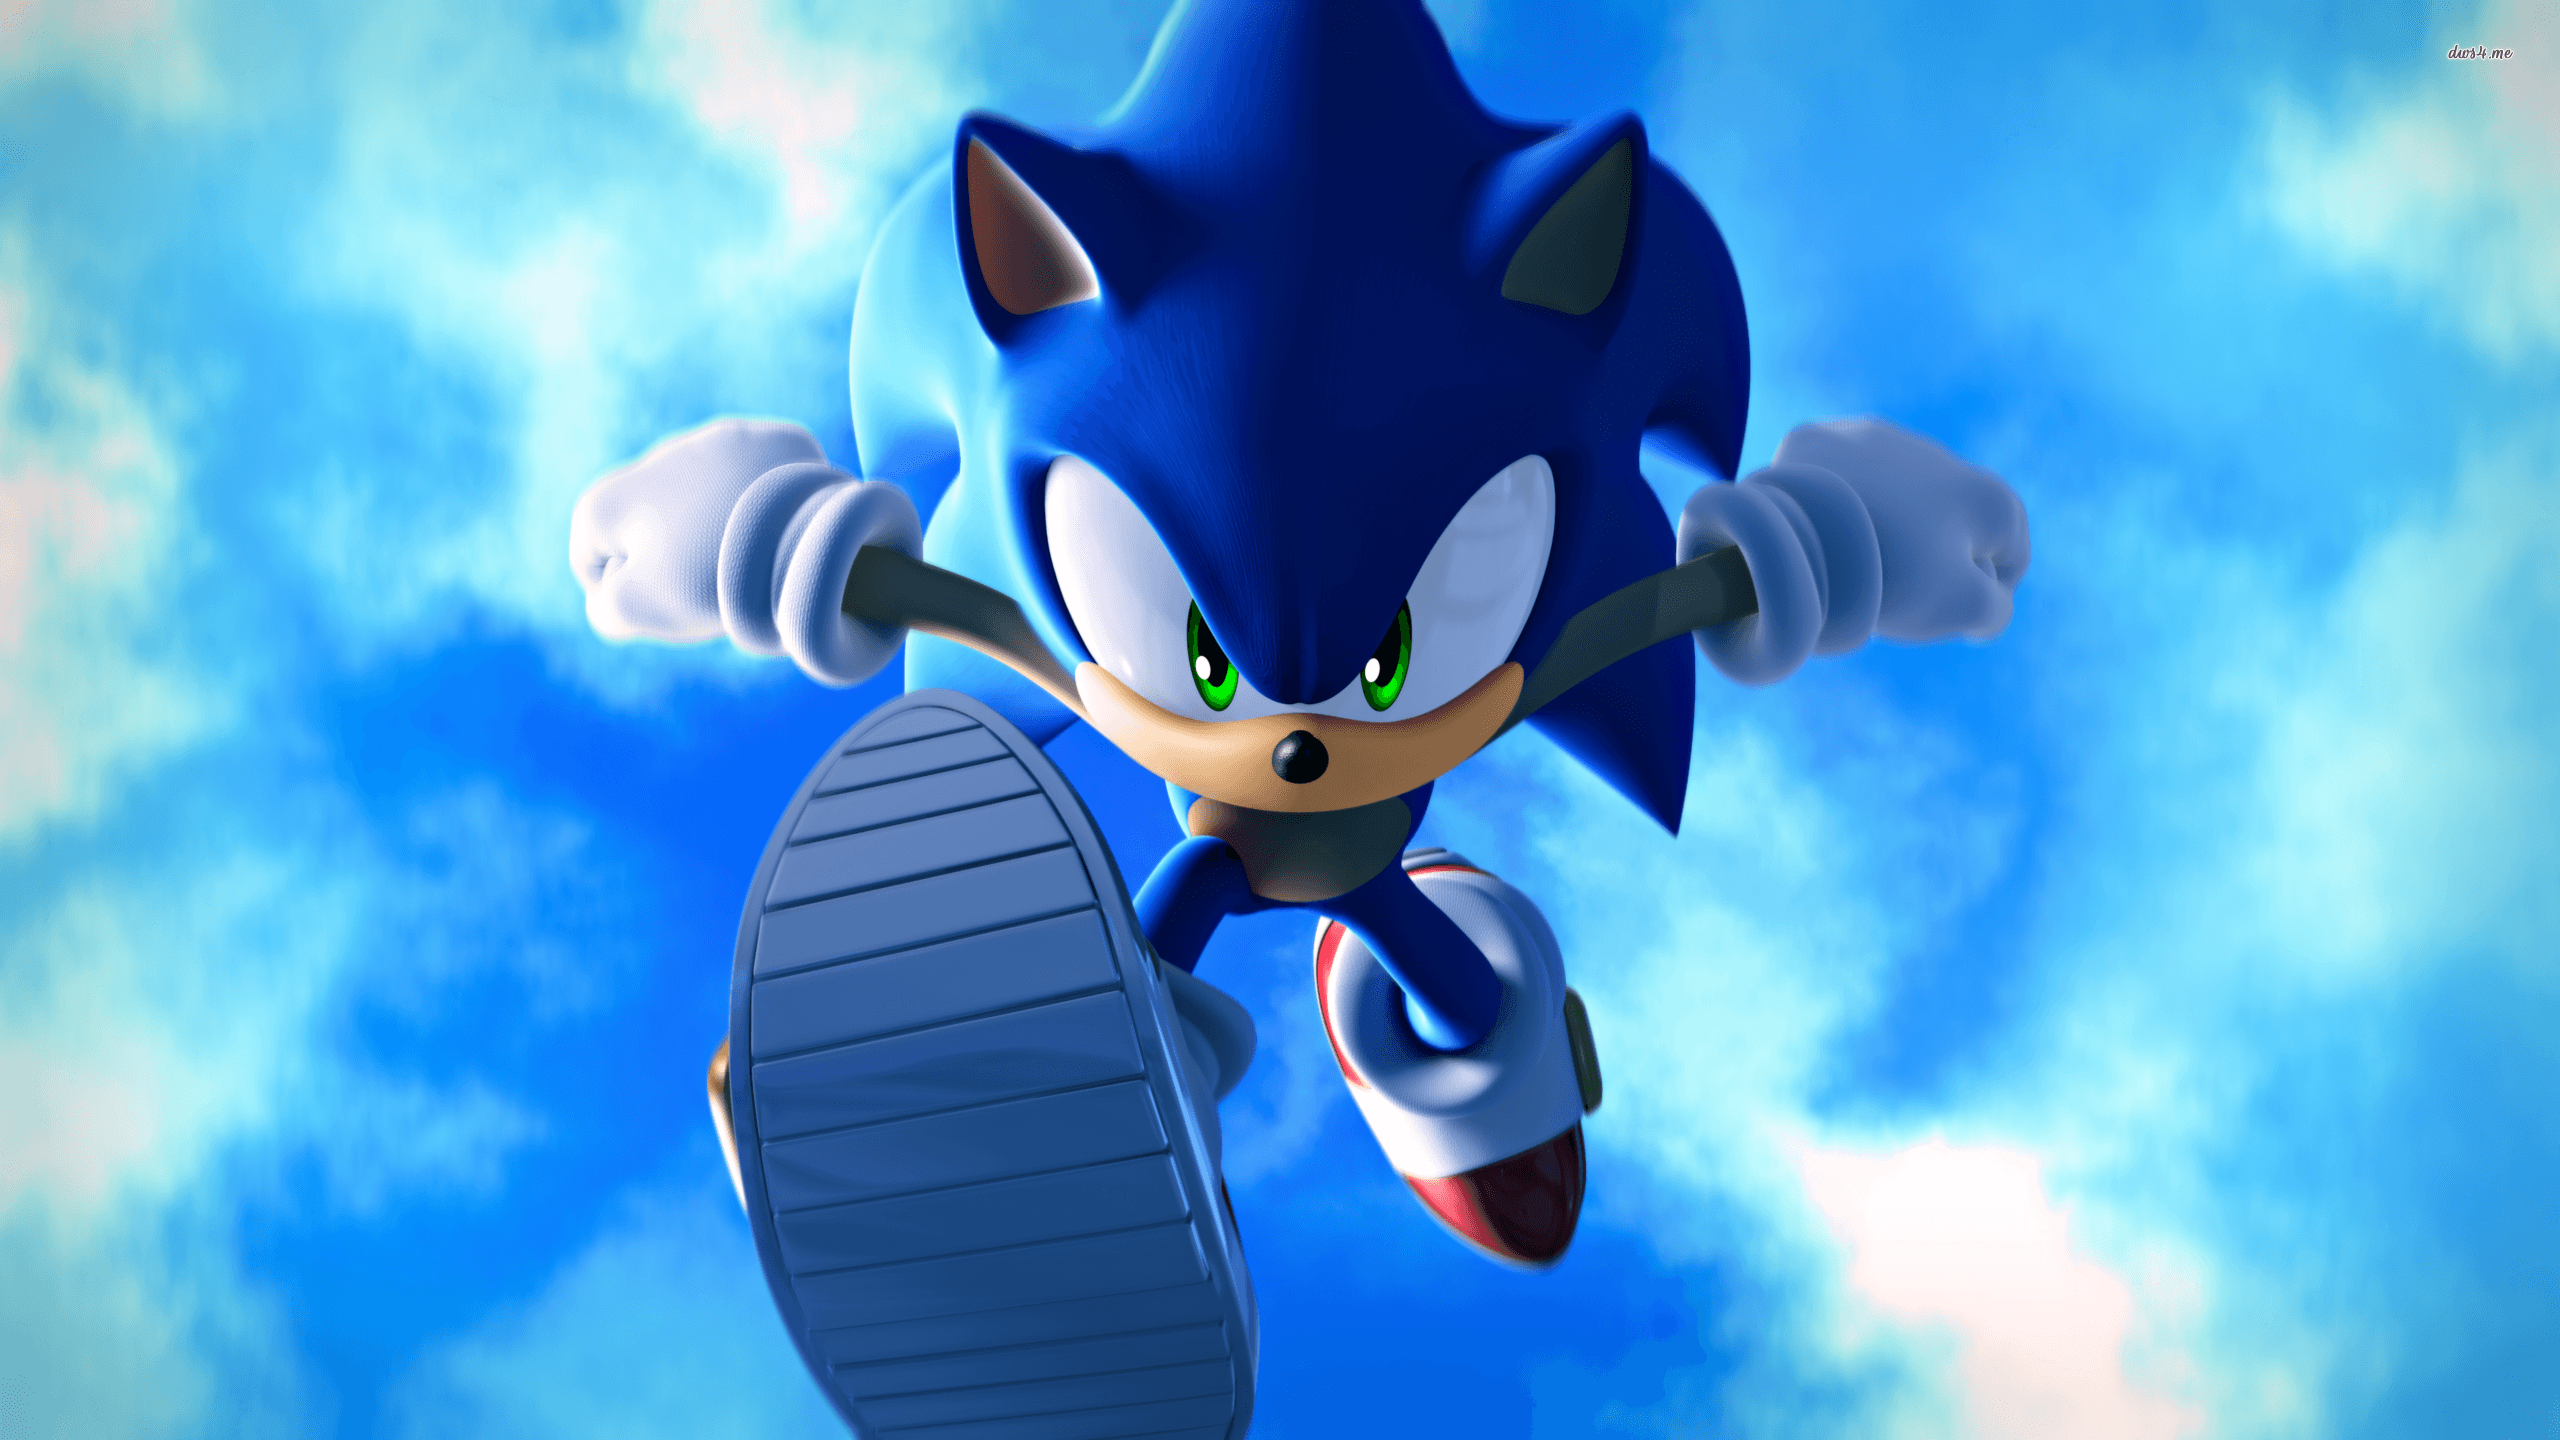 Blue 4K HD Sonic the Hedgehog Wallpapers  HD Wallpapers  ID 98696